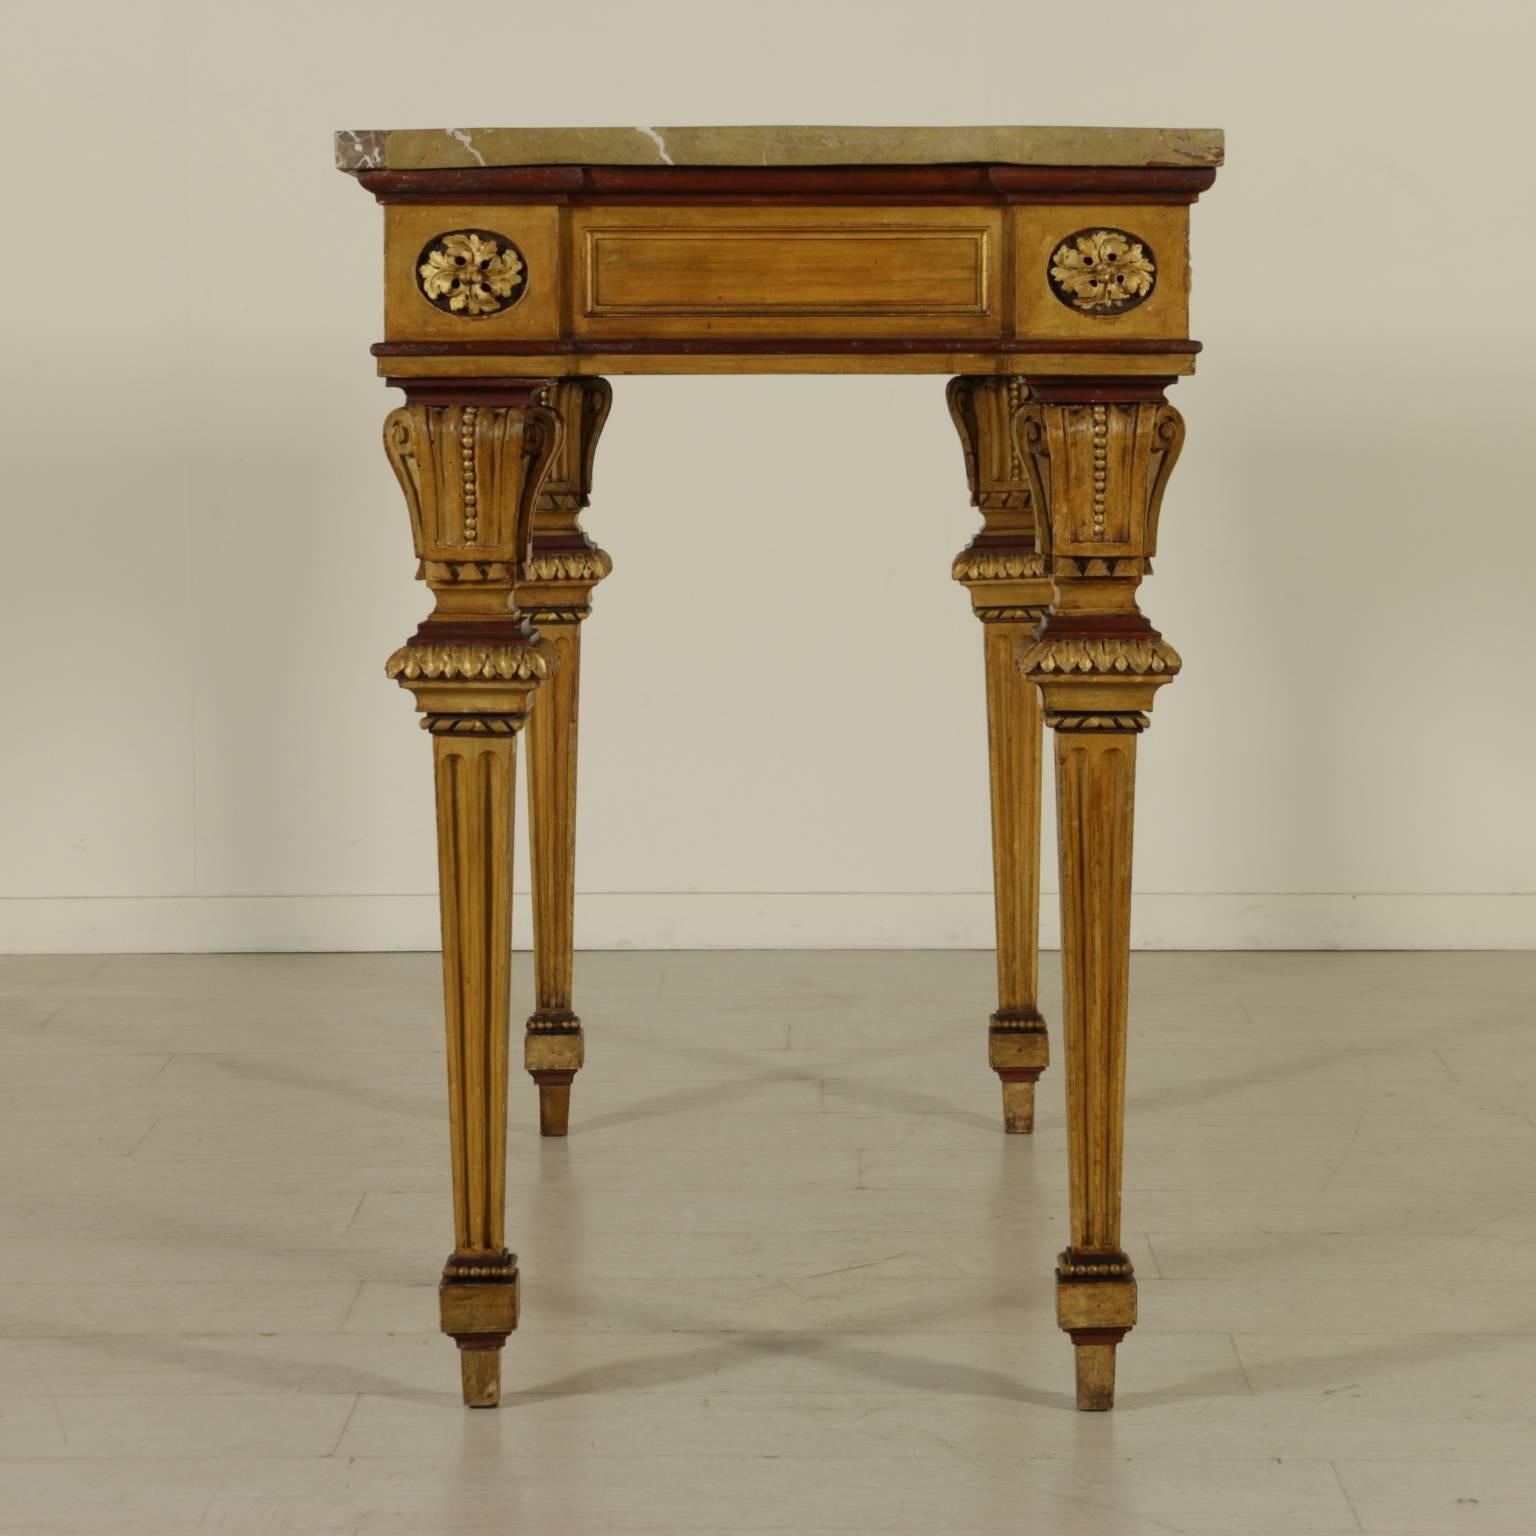 A neoclassical late 18th century lacquered wood wall table with truncated pyramid legs and carved shelves. Frames decorated with leaves, lion head and oak leaves roses. Macchiavecchia marble top. Gilded and lacquered. Manufactured in Northern Italy